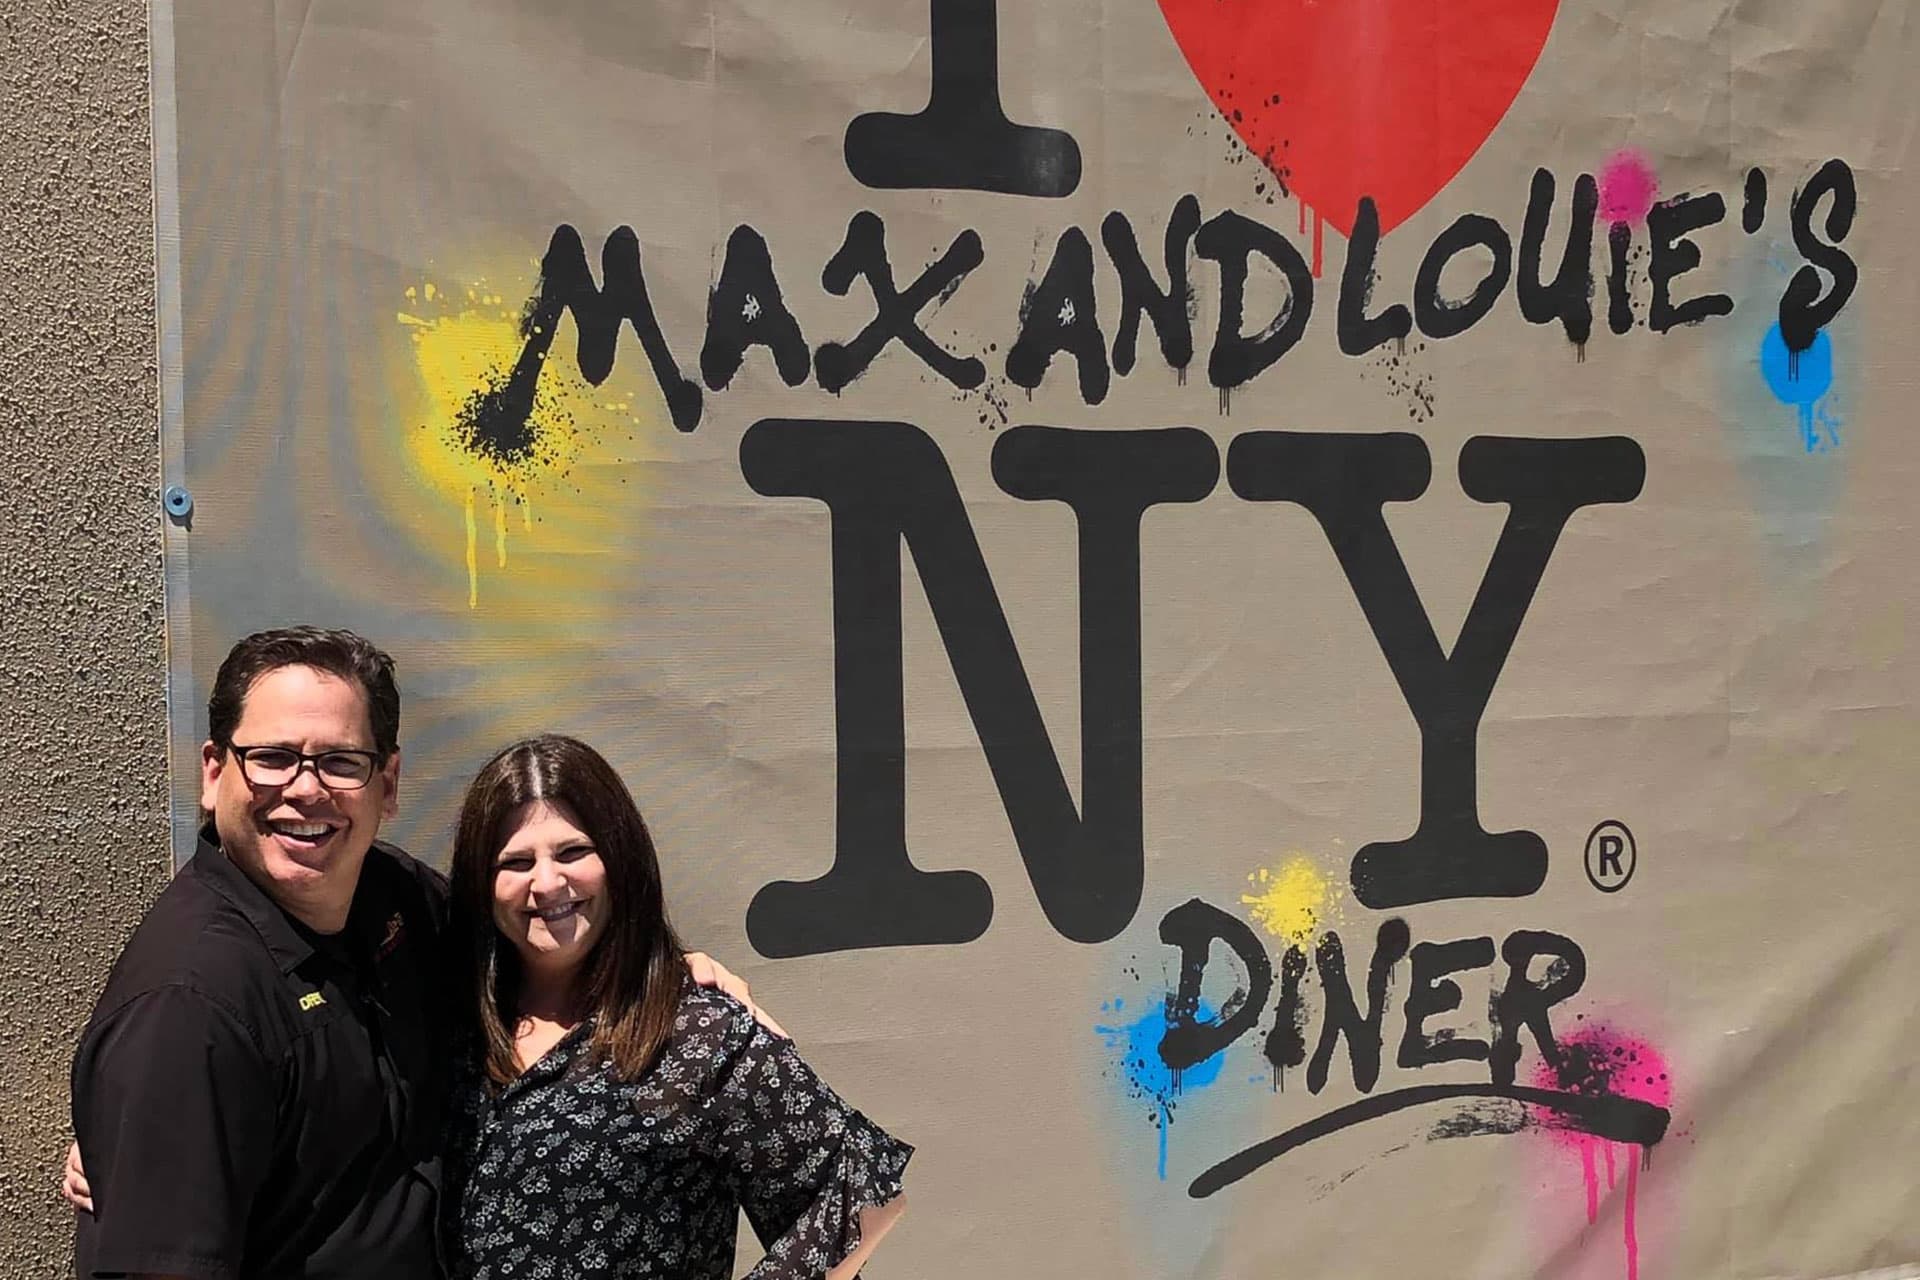 Owners of Max and Louie's New York Diner standing in front of graffiti signage